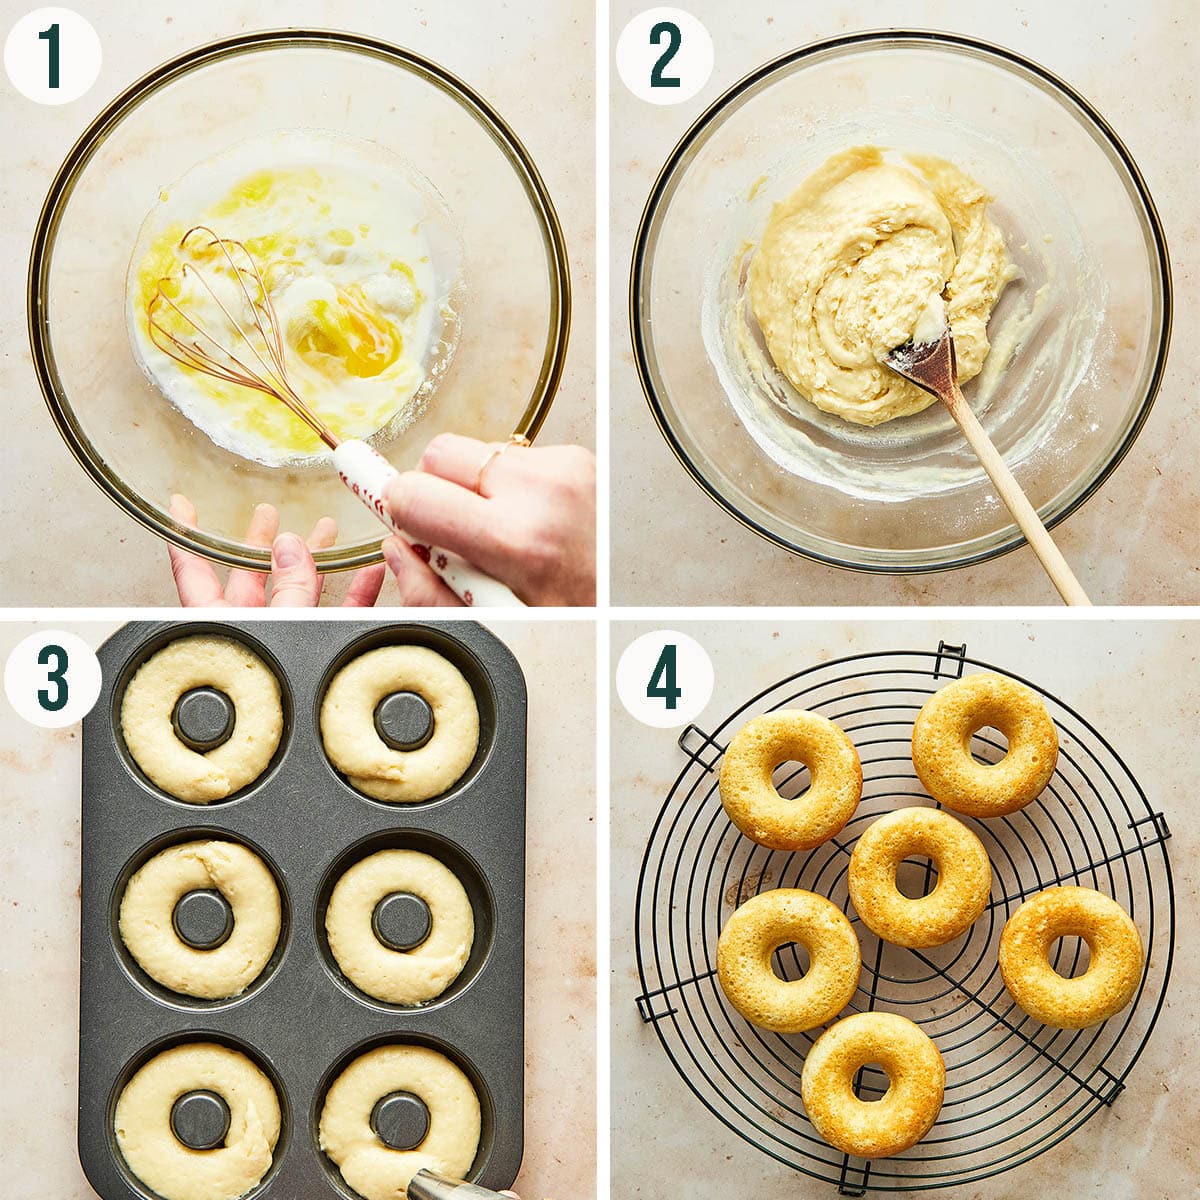 Baked donuts steps 1 to 4, mixing the batter and before and after baking.